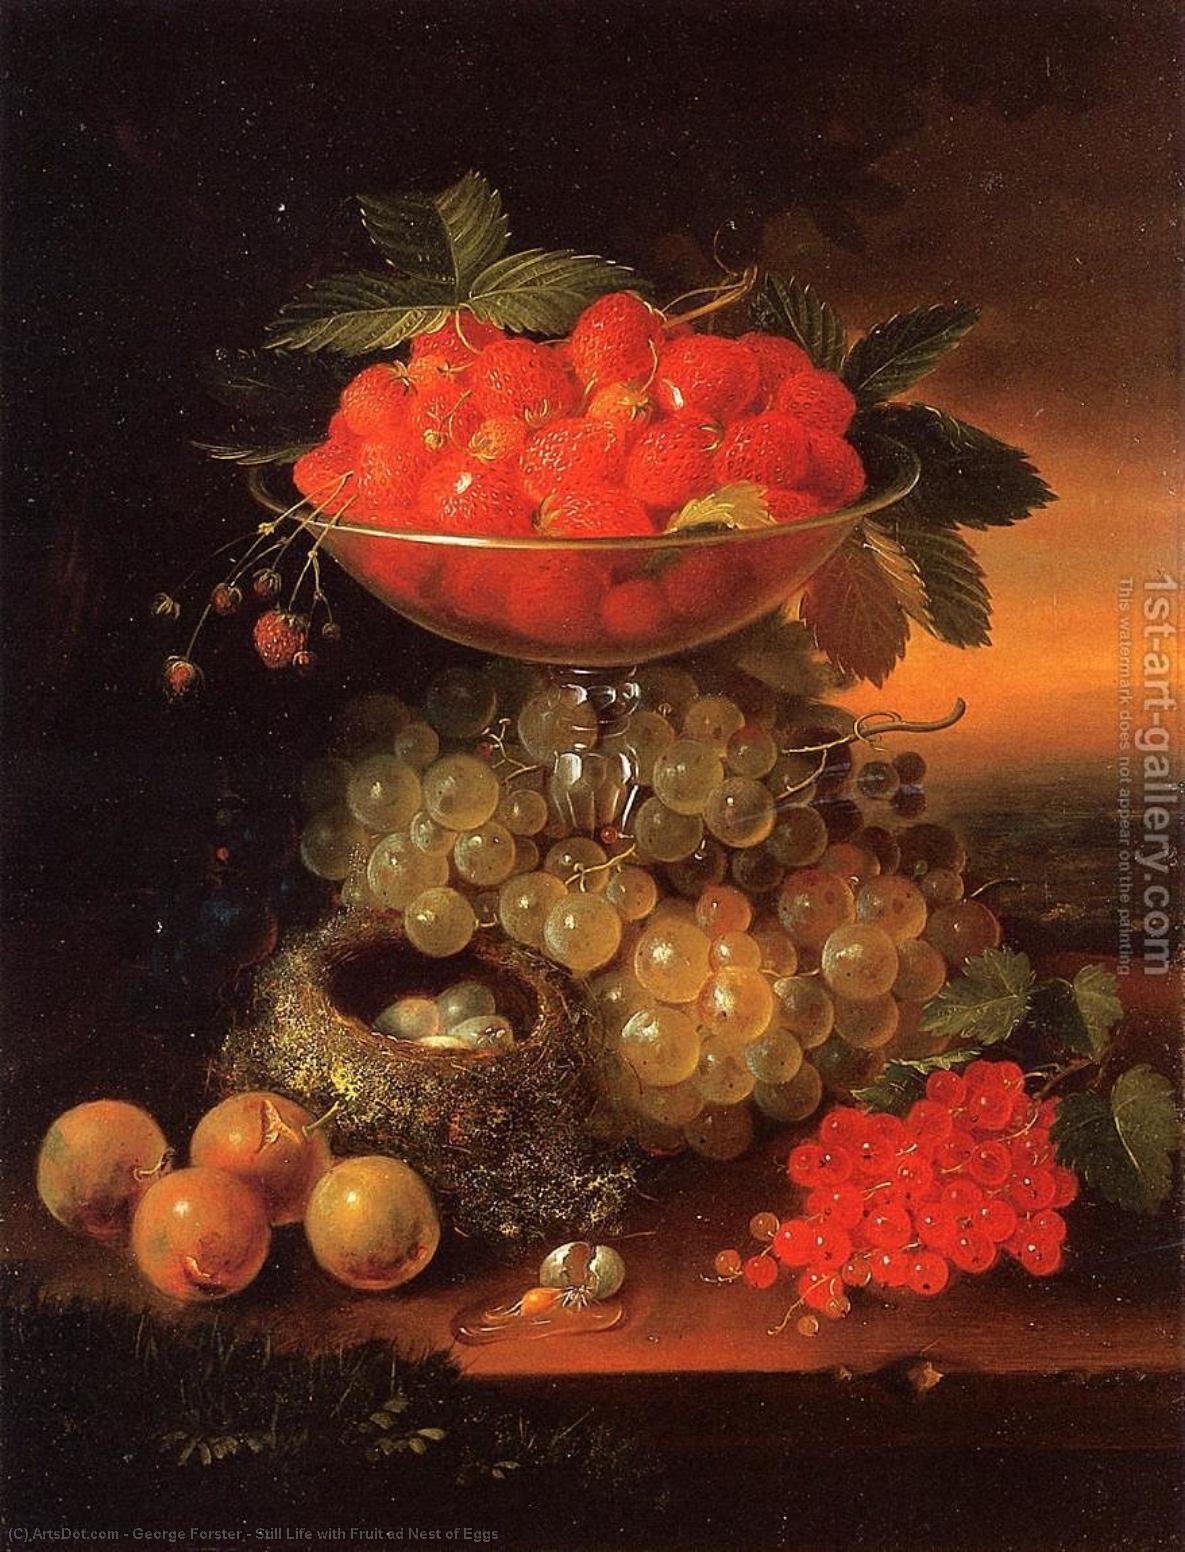 Order Art Reproductions Still Life with Fruit ad Nest of Eggs, 1869 by George Forster (1817-1896, Germany) | ArtsDot.com